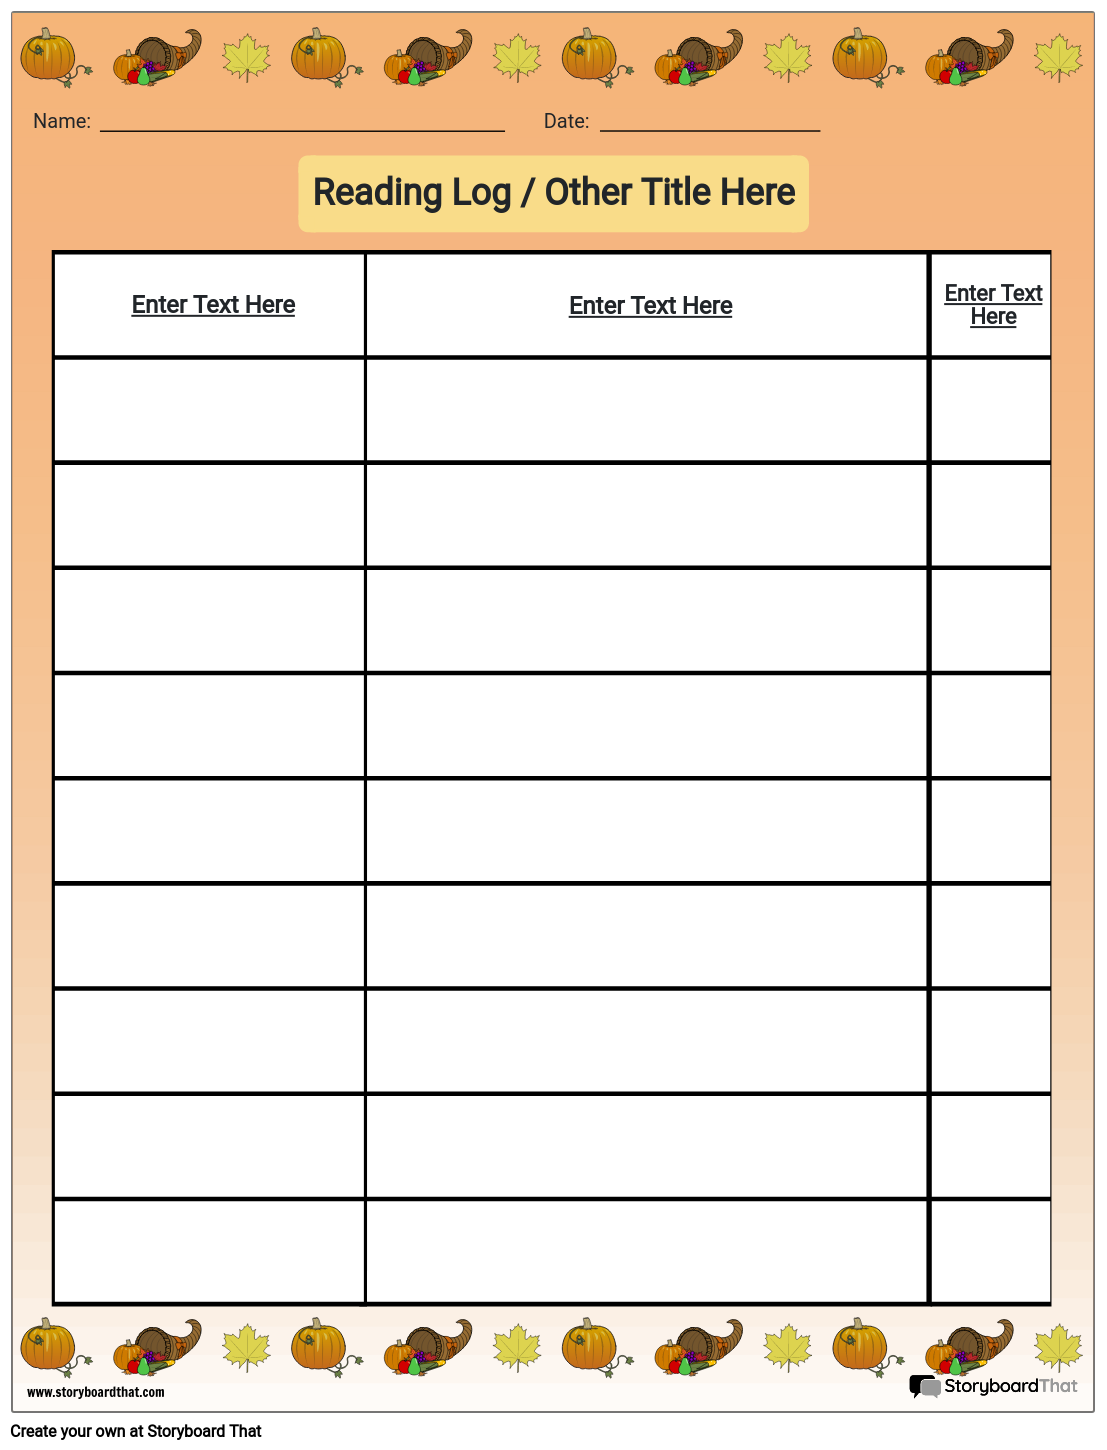 reading-log-template-create-a-reading-log-storyboardthat